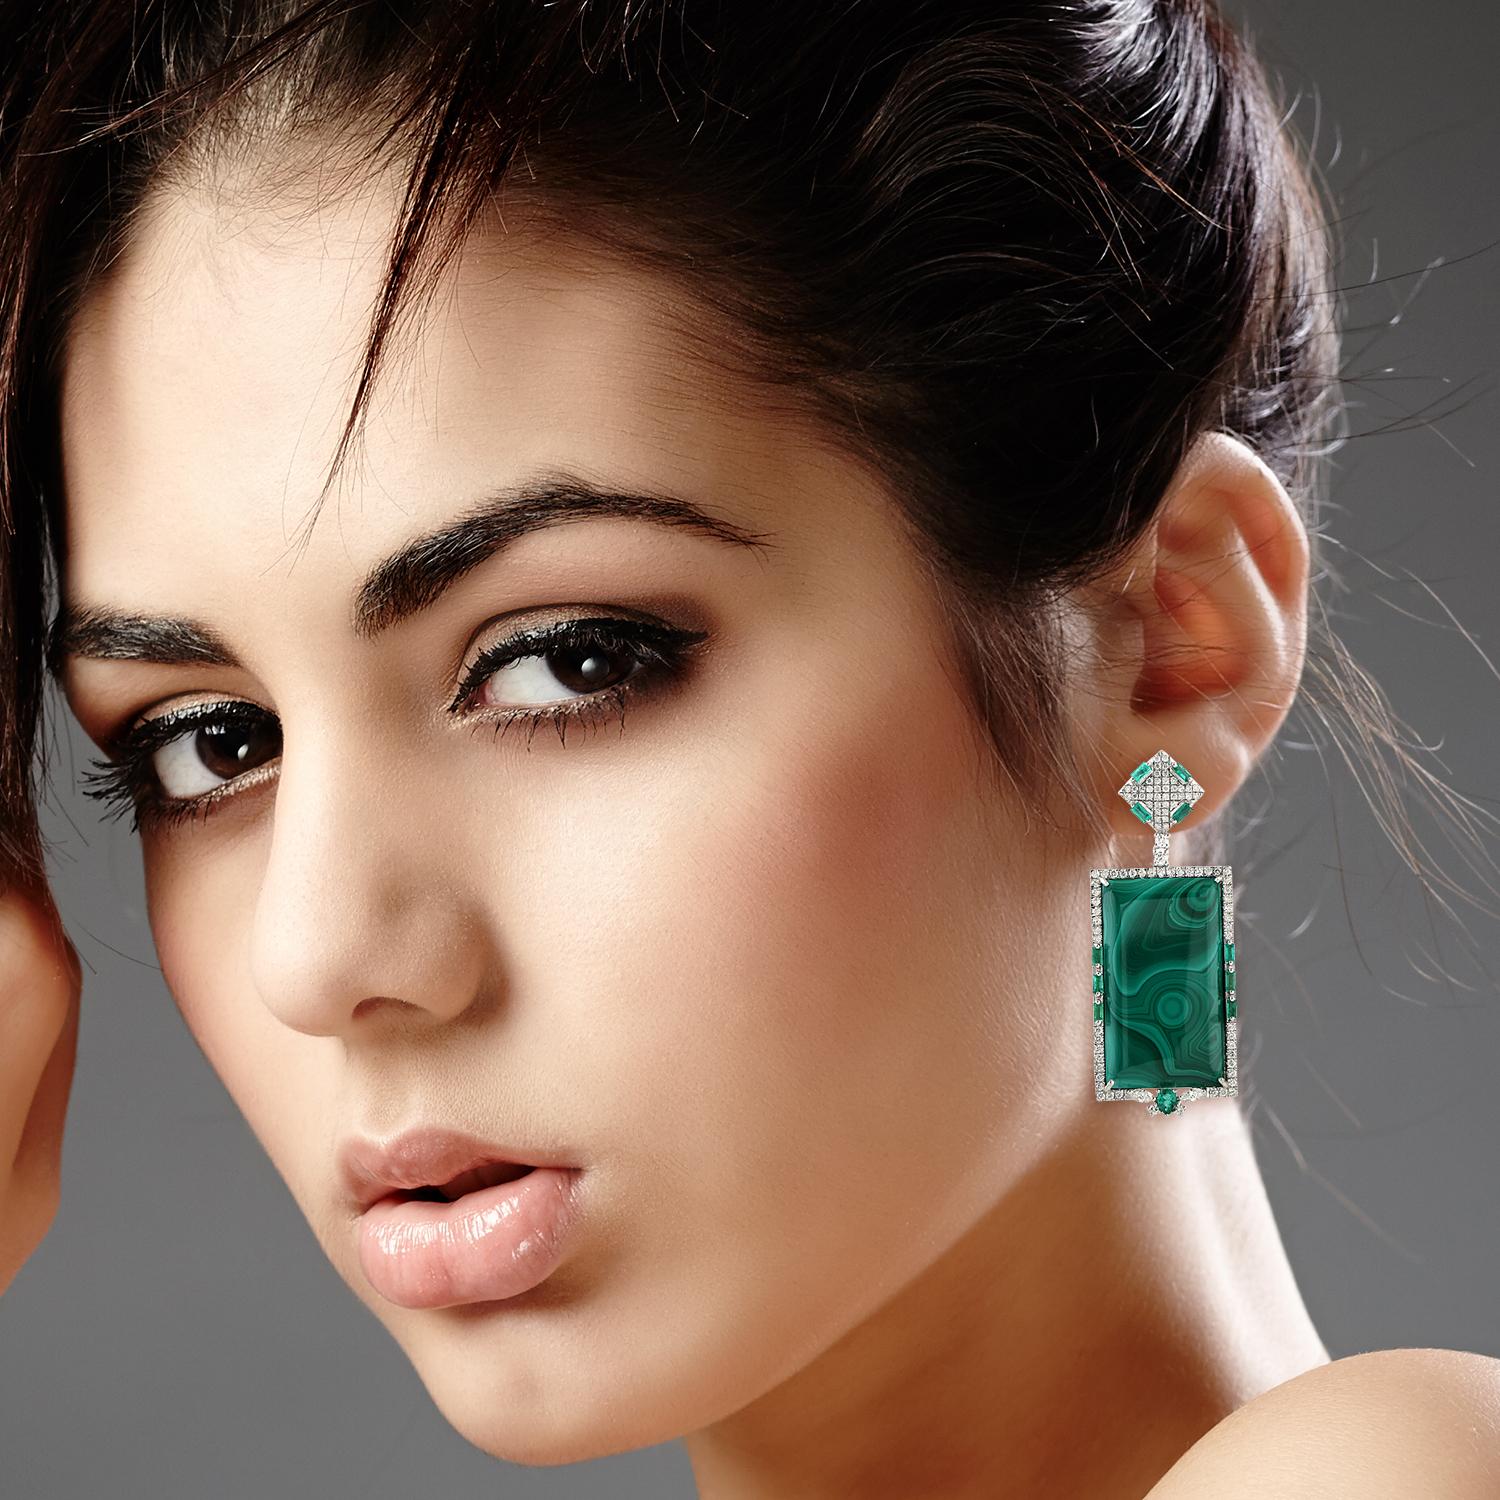 Handcrafted from 18-karat gold, these beautiful earrings are set with 1.51 carats emerald, 50.55 carats Malachite and 1.89 carats of glimmering diamonds.

FOLLOW  MEGHNA JEWELS storefront to view the latest collection & exclusive pieces.  Meghna